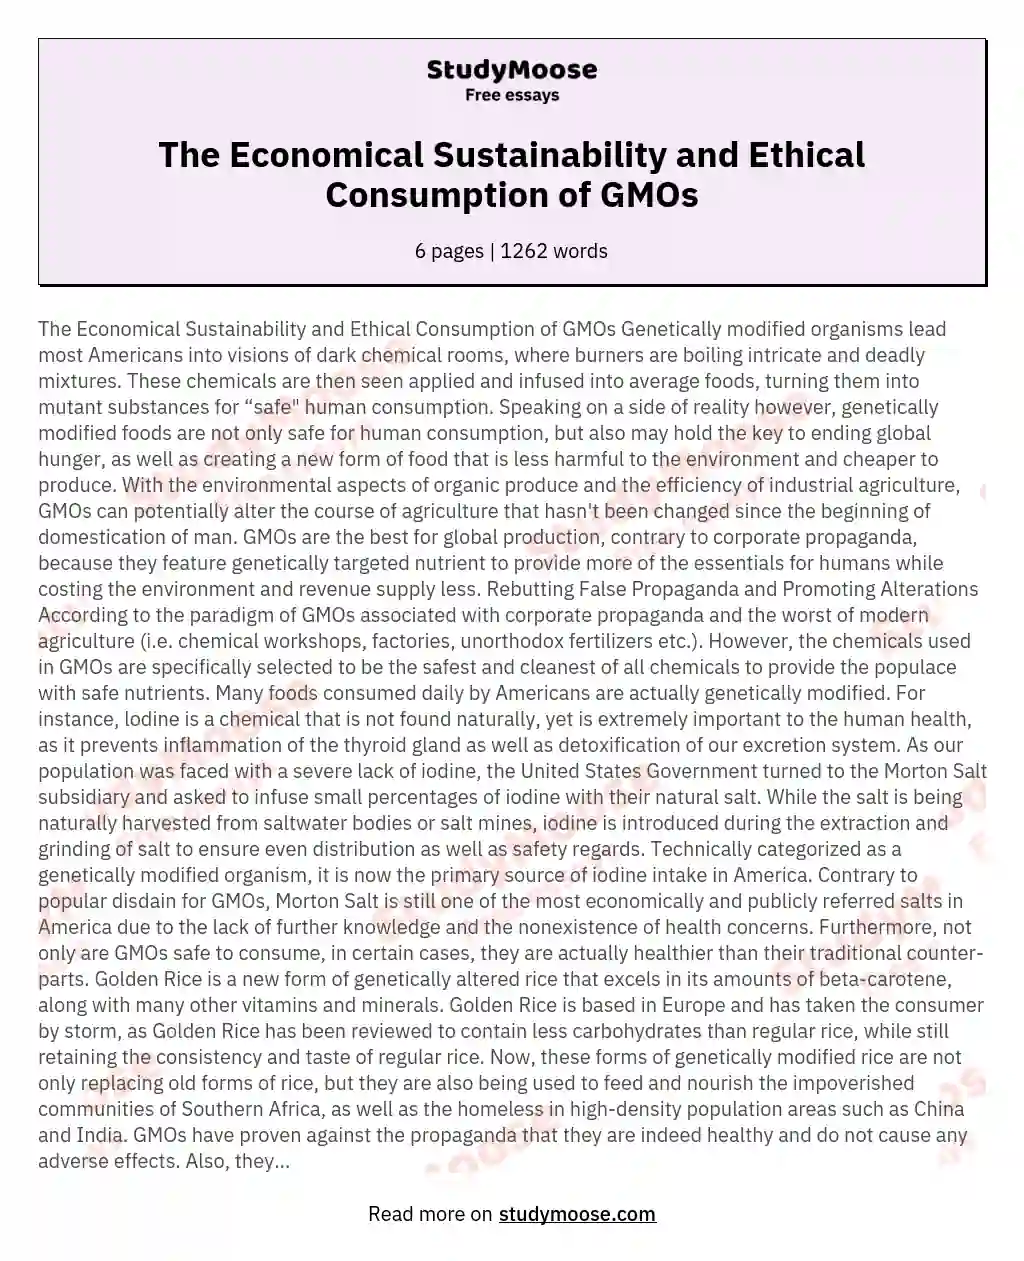 The Economical Sustainability and Ethical Consumption of GMOs essay